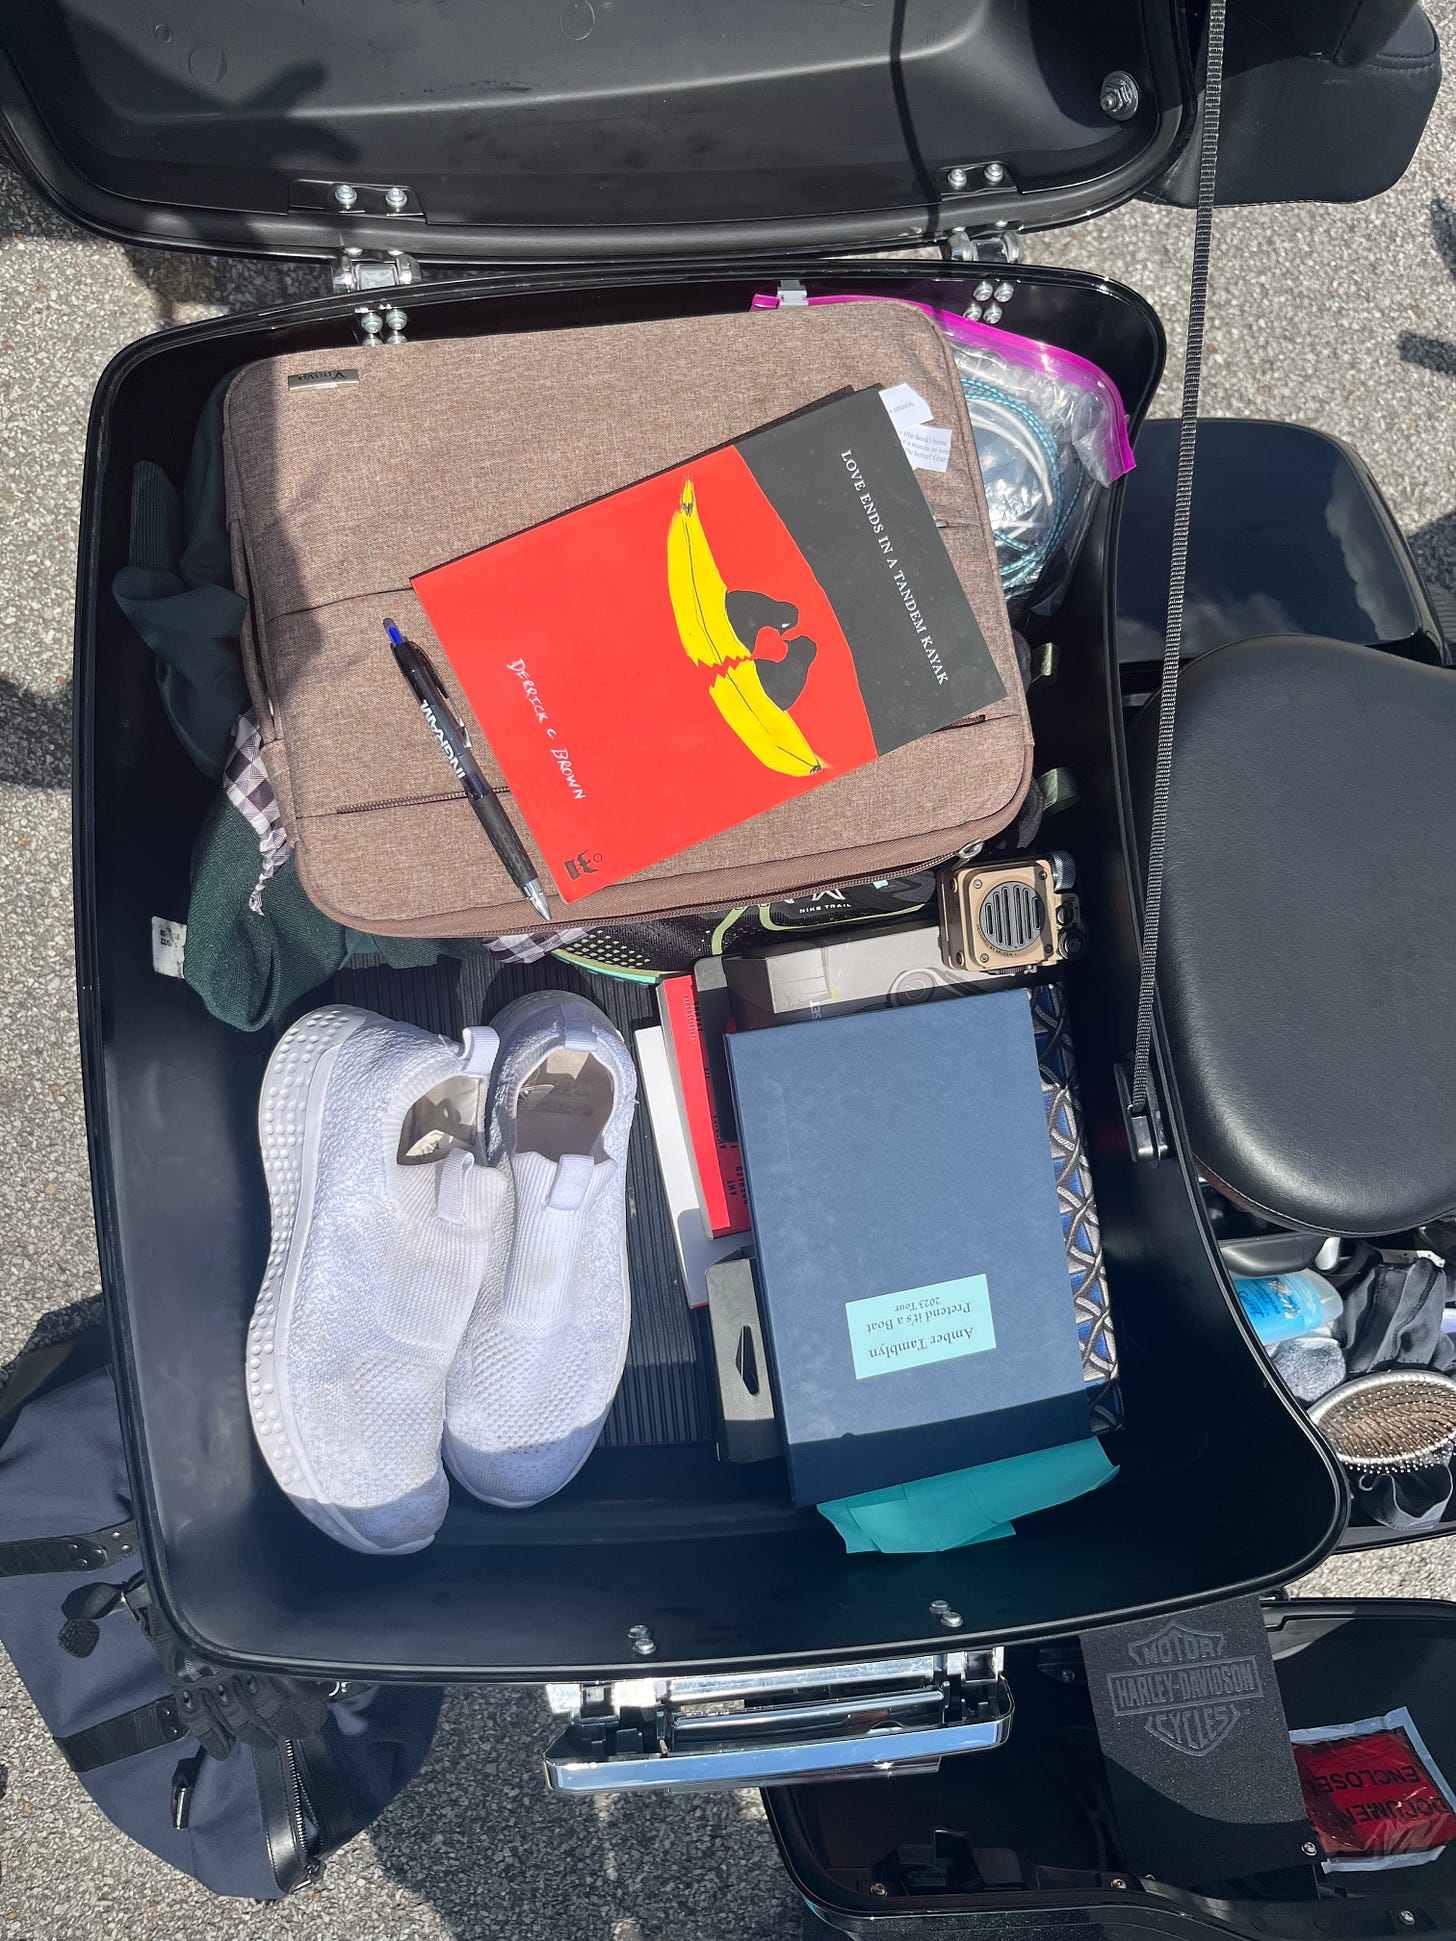 An overhead view of the inside of the storage compartment on the motorcycle. In it are Amber and Derrick's books, a pair of sneakers, and some folded clothes.